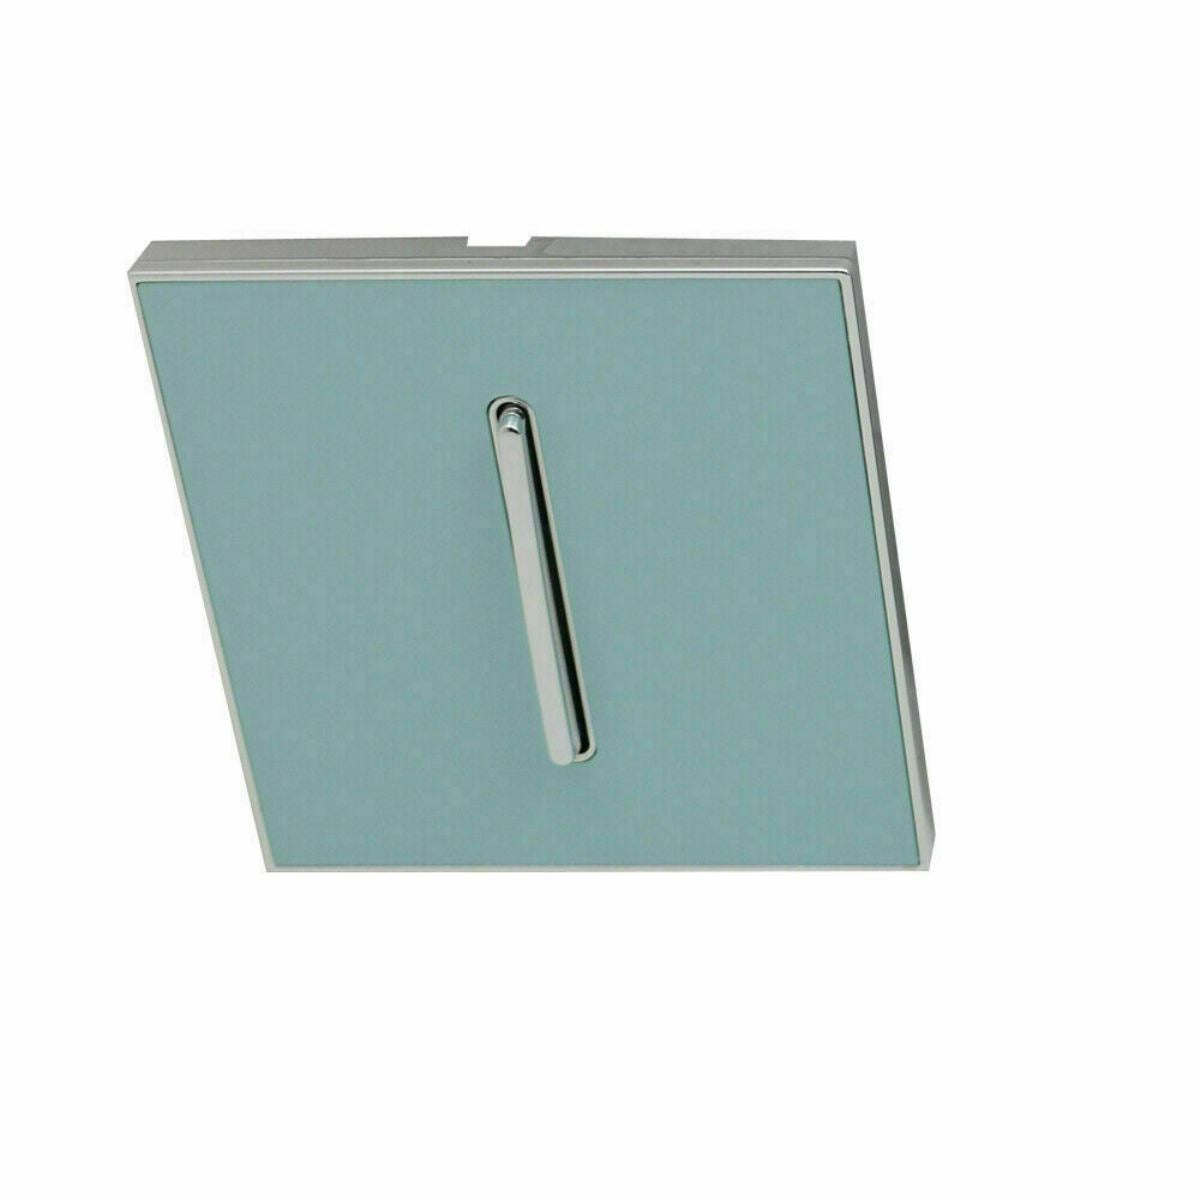 Blue Glossy 1 Gang Screw less Wall Light Switch